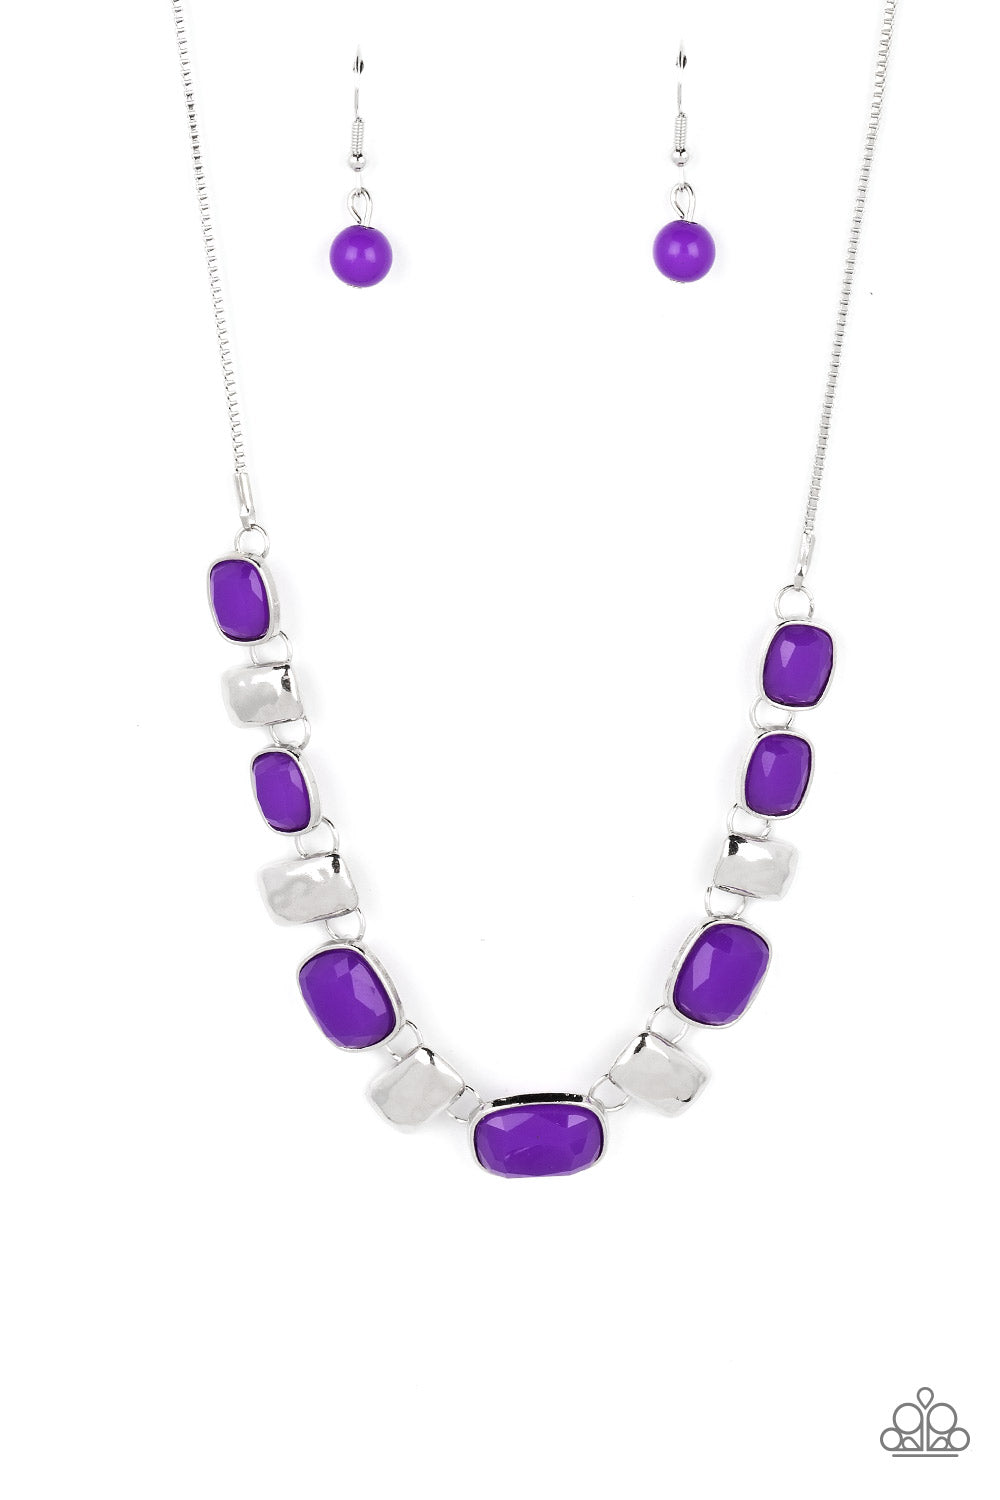 Bedazzled Bliss Multi Necklace - Jewelry by Bretta